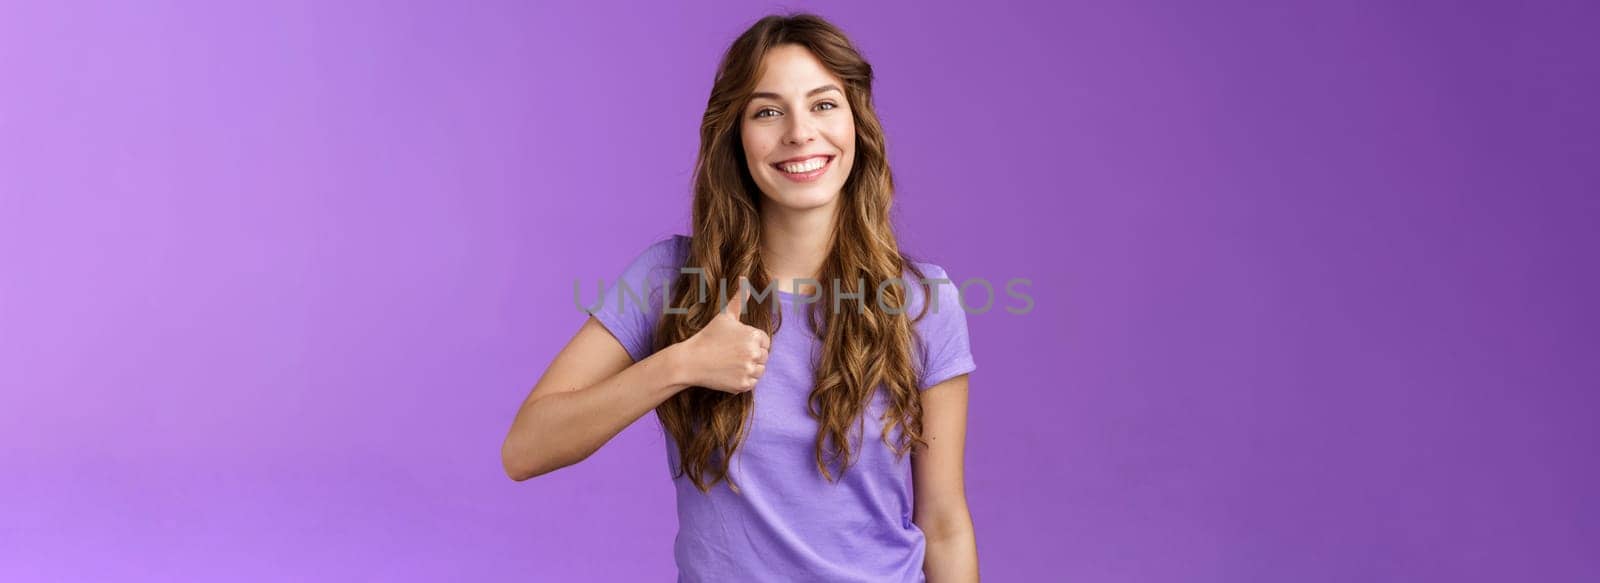 Supportive girl give friend positive reply thumb up sign smiling broadly satisfied good choice grinning approving awesome plan agree terms like your outfit positive opinion purple background. Lifestyle.